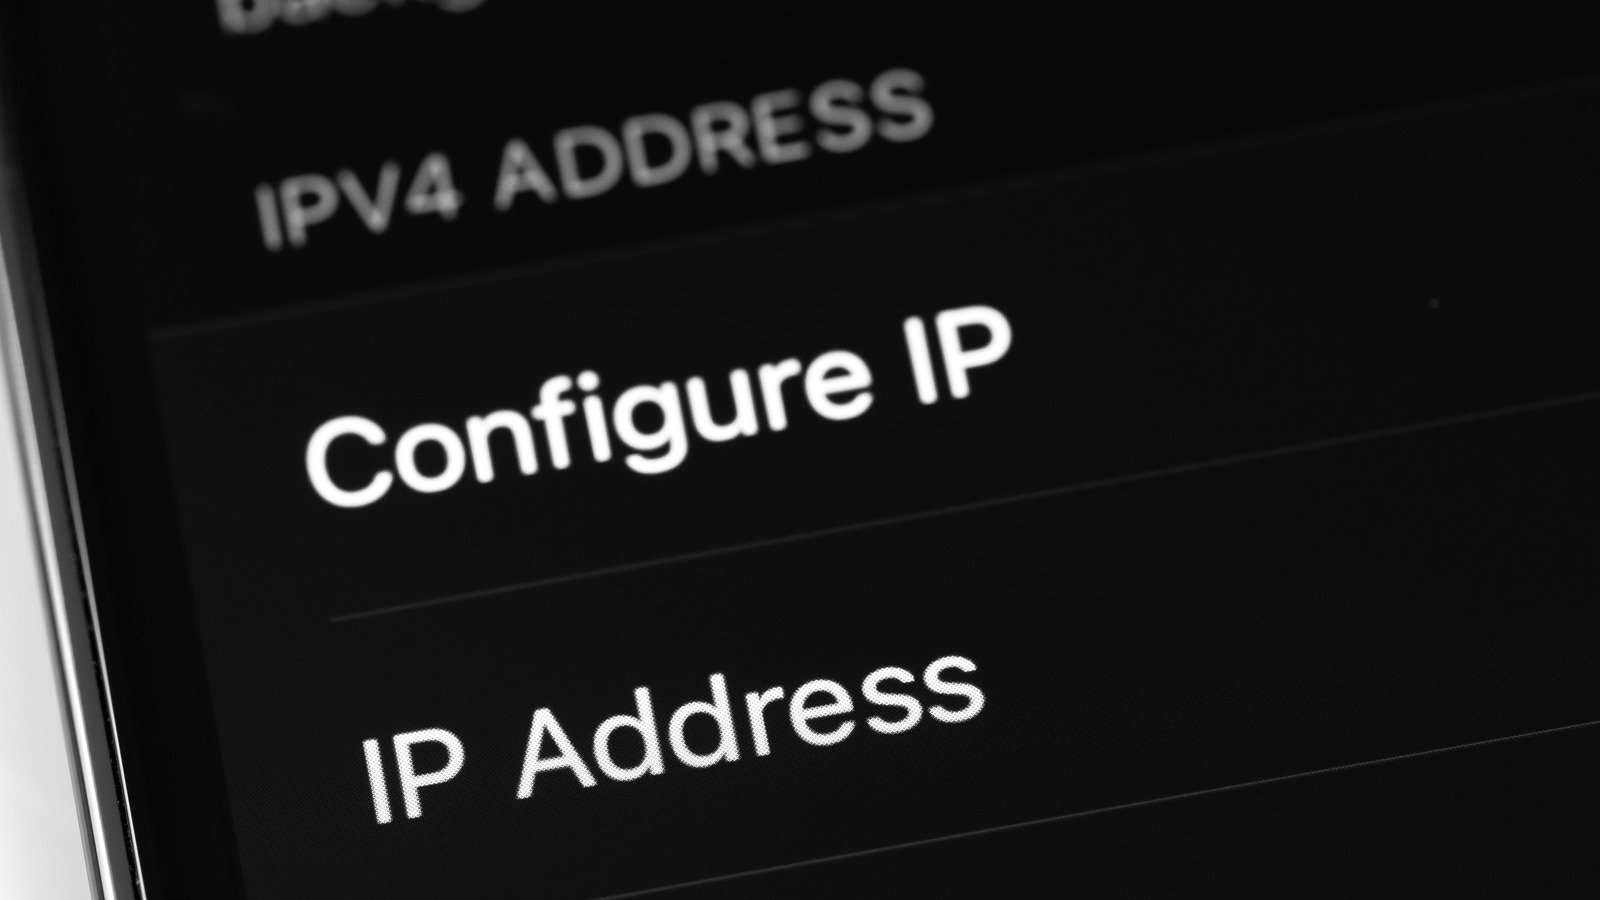 How To Find Ip Address On Android